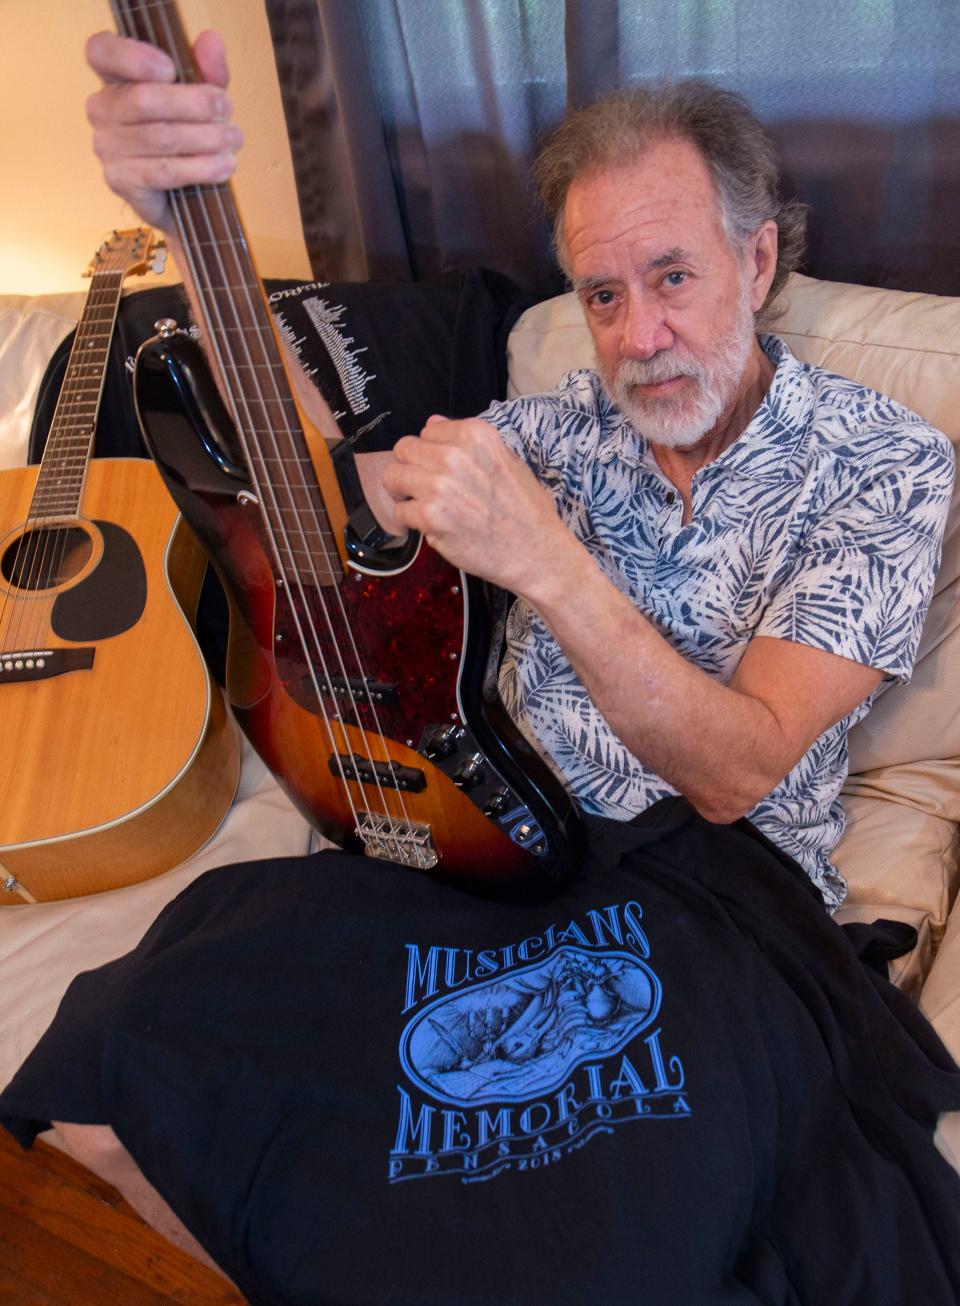 Pensacola Musician Mike Wheeler is helping to organize the return of the Musician's Memorial concert. The event honors the memory of musicians with local ties who have passed away.